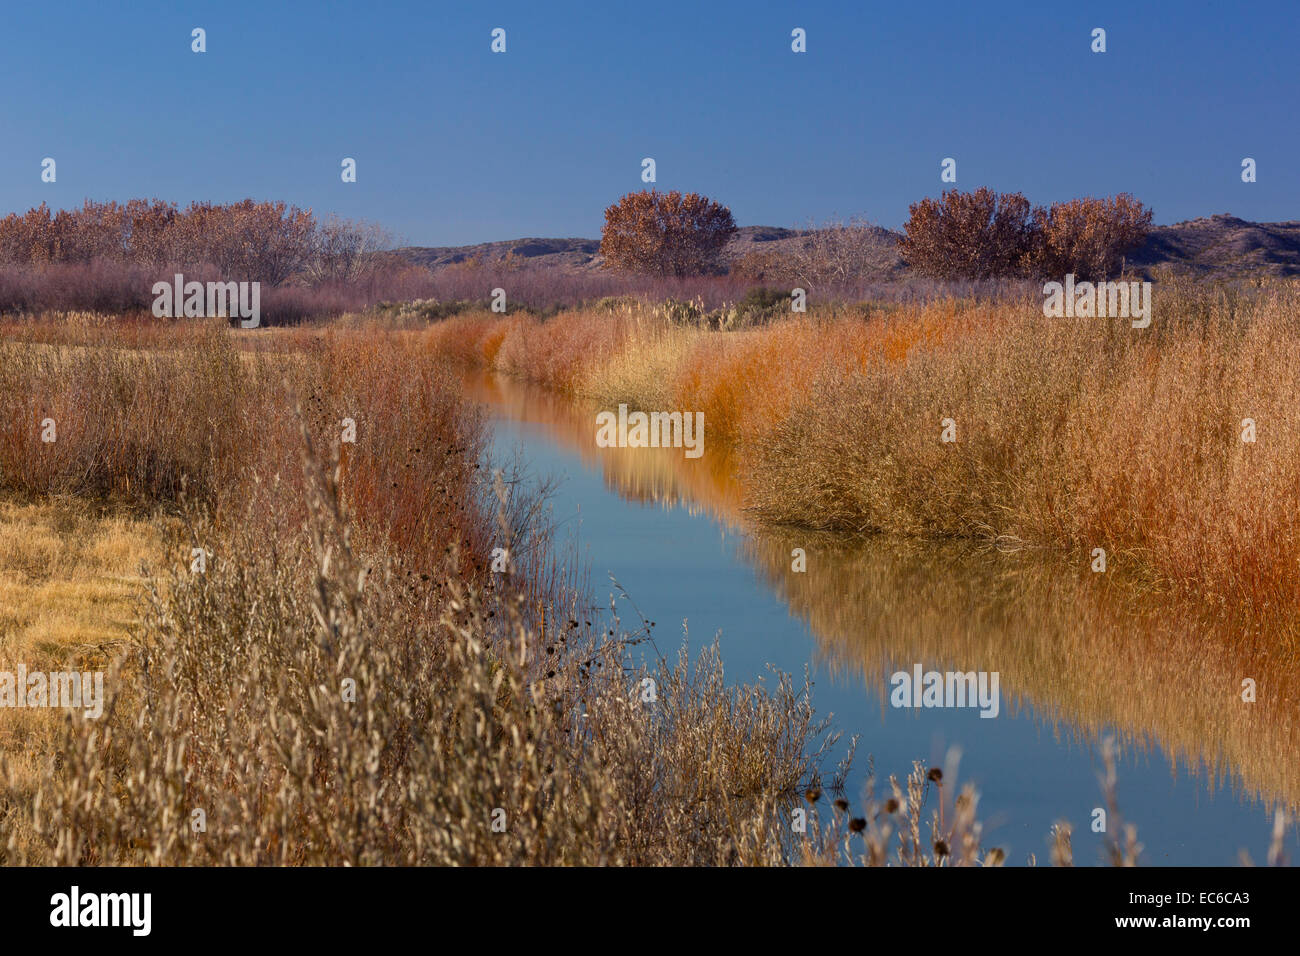 Good, active strategies of water and land management bring autumn color and splendor to Bosque del Apache Stock Photo